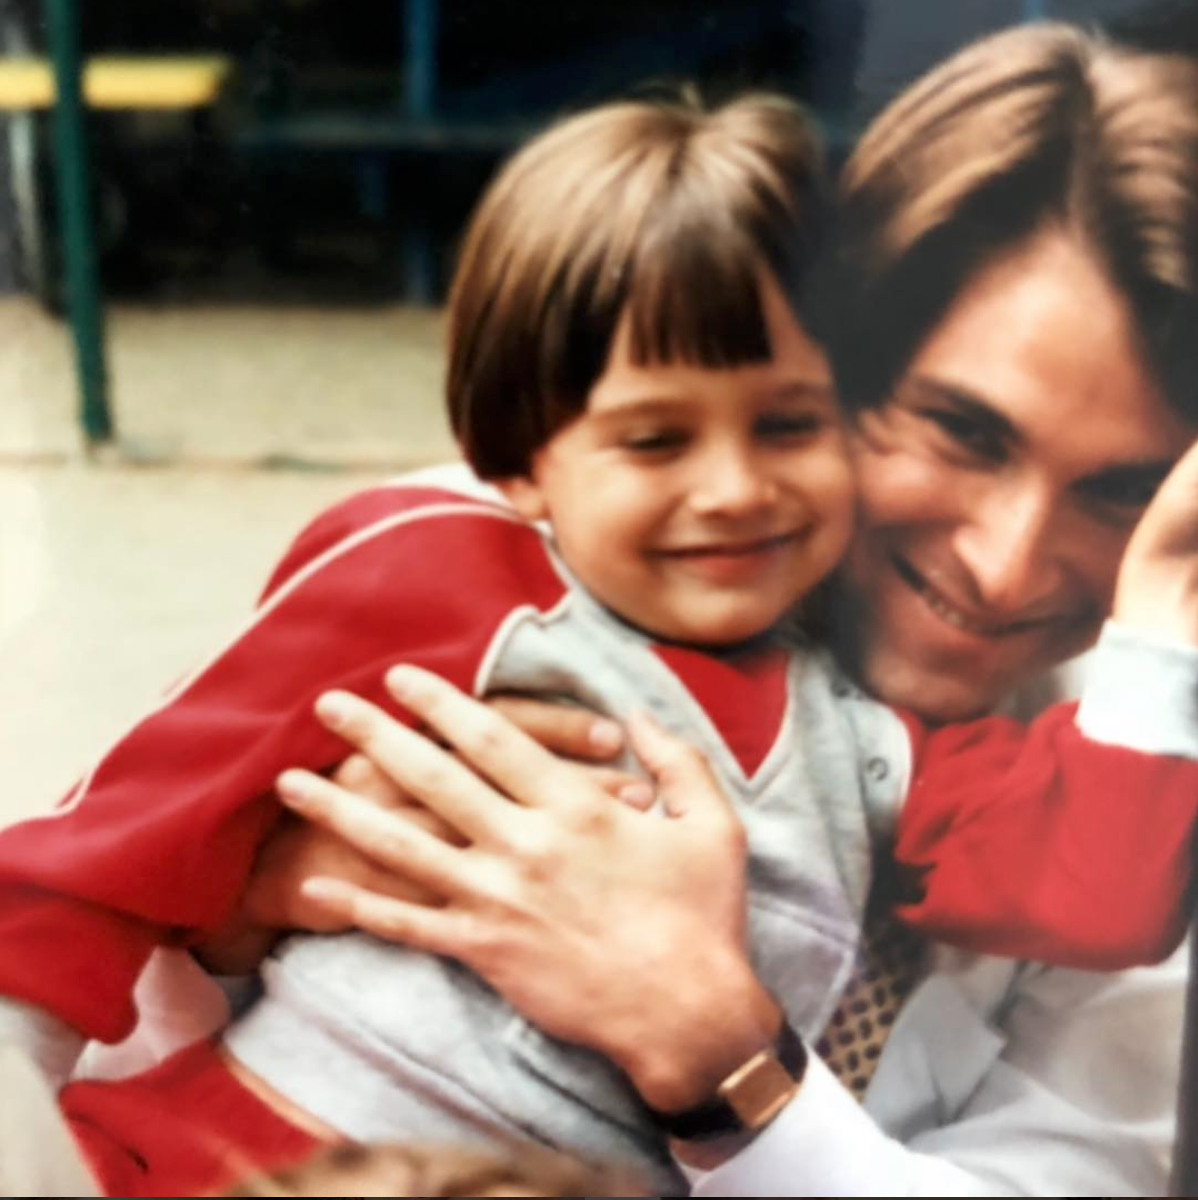 Days of Our Lives' Brandon Barash Writes Emotional Post About Late Father